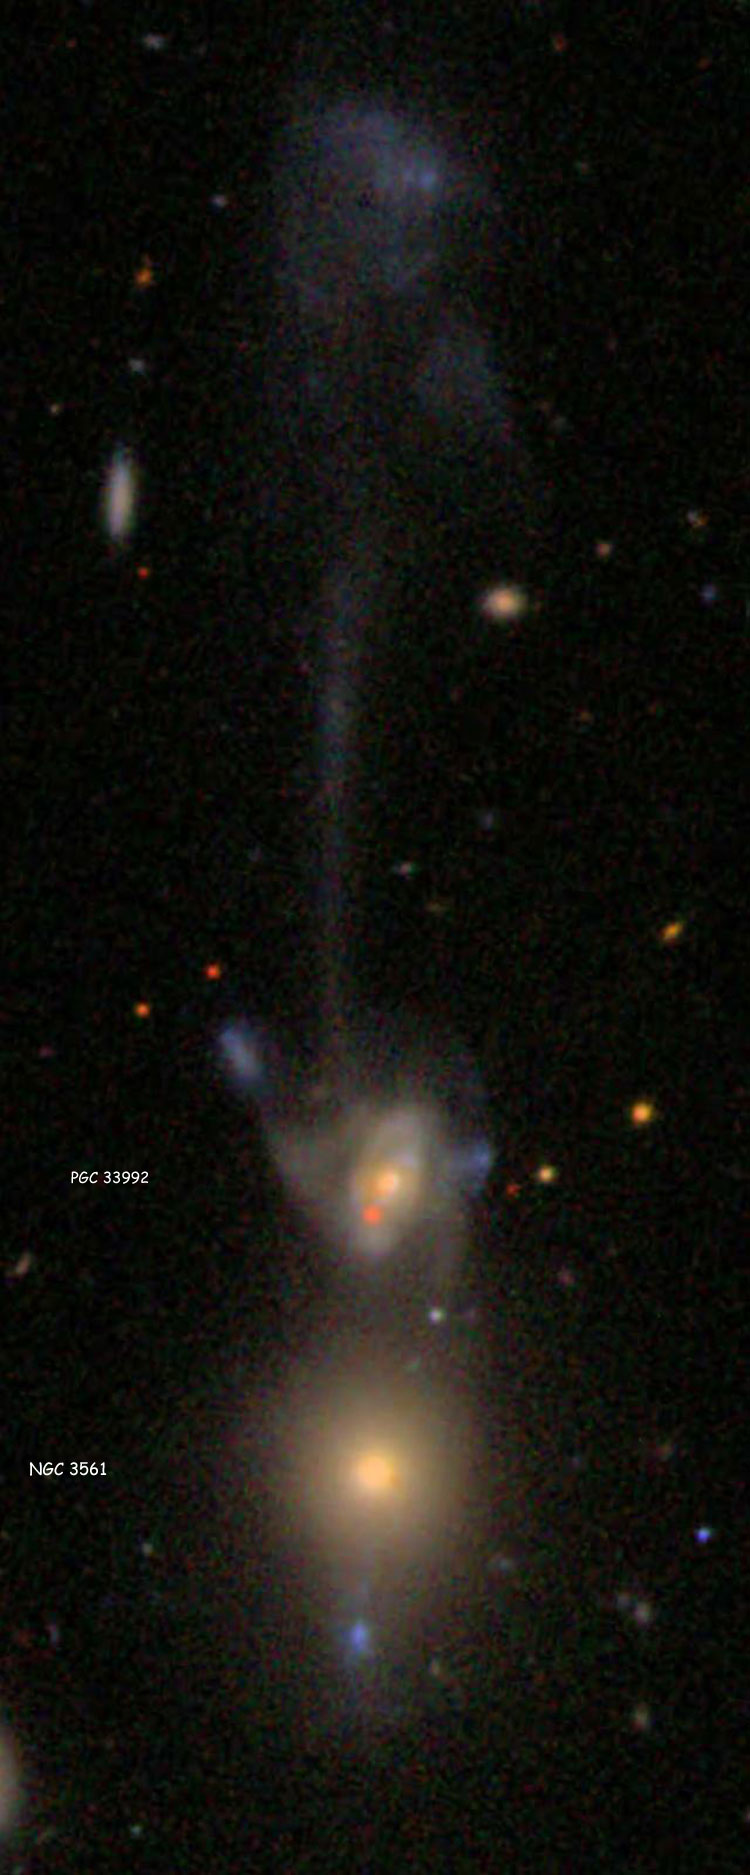 SDSS image of lenticular galaxy NGC 3561 and spiral galaxy PGC 33992, which comprise Arp 105, showing the long counter-tail of the spiral galaxy